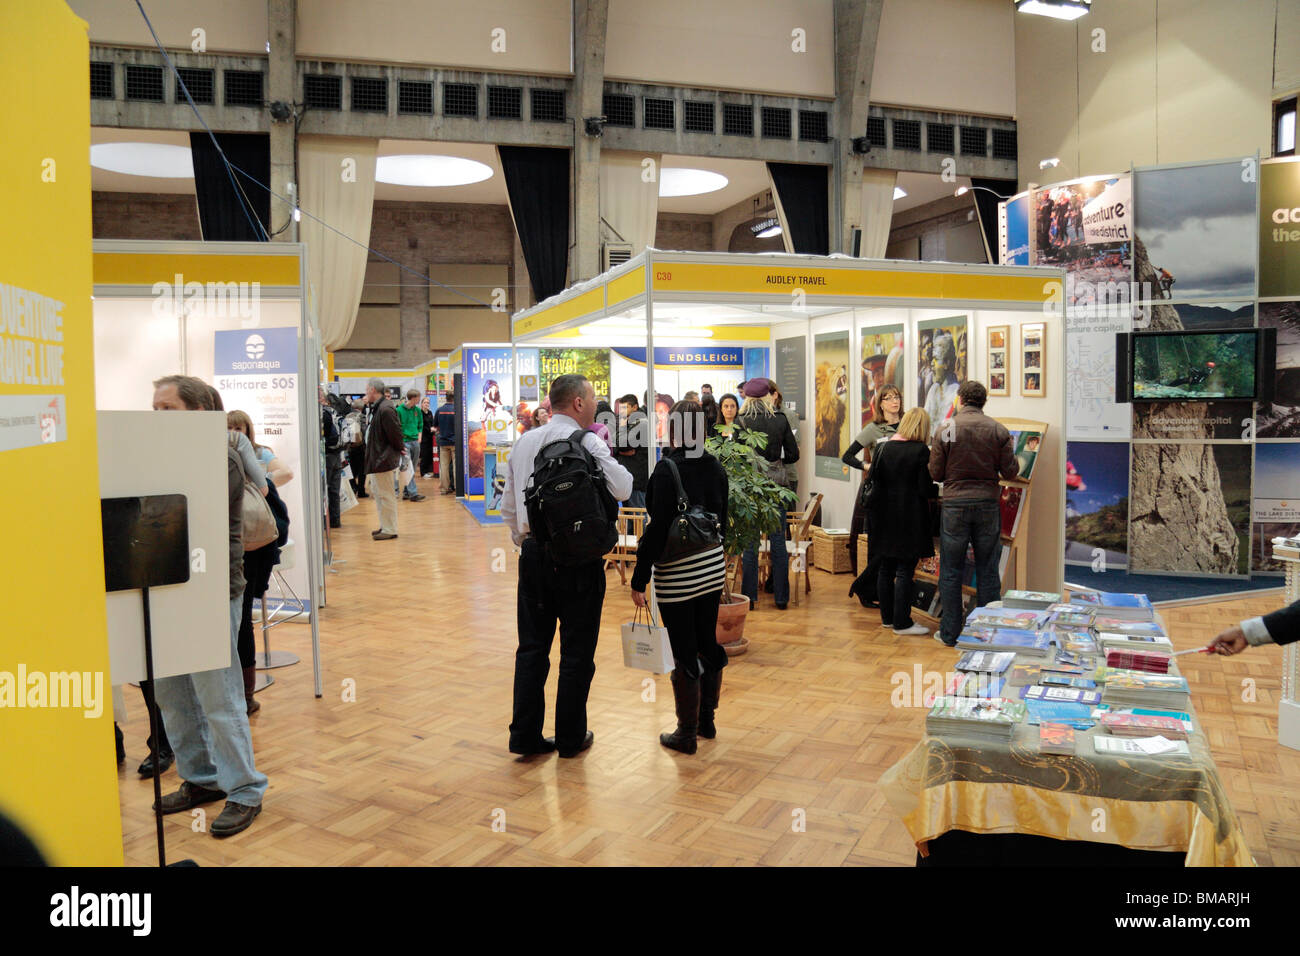 General view of the main exhibition halls at the Adventure Show, Royal Horticultural Halls, London, Jan 2010. Stock Photo